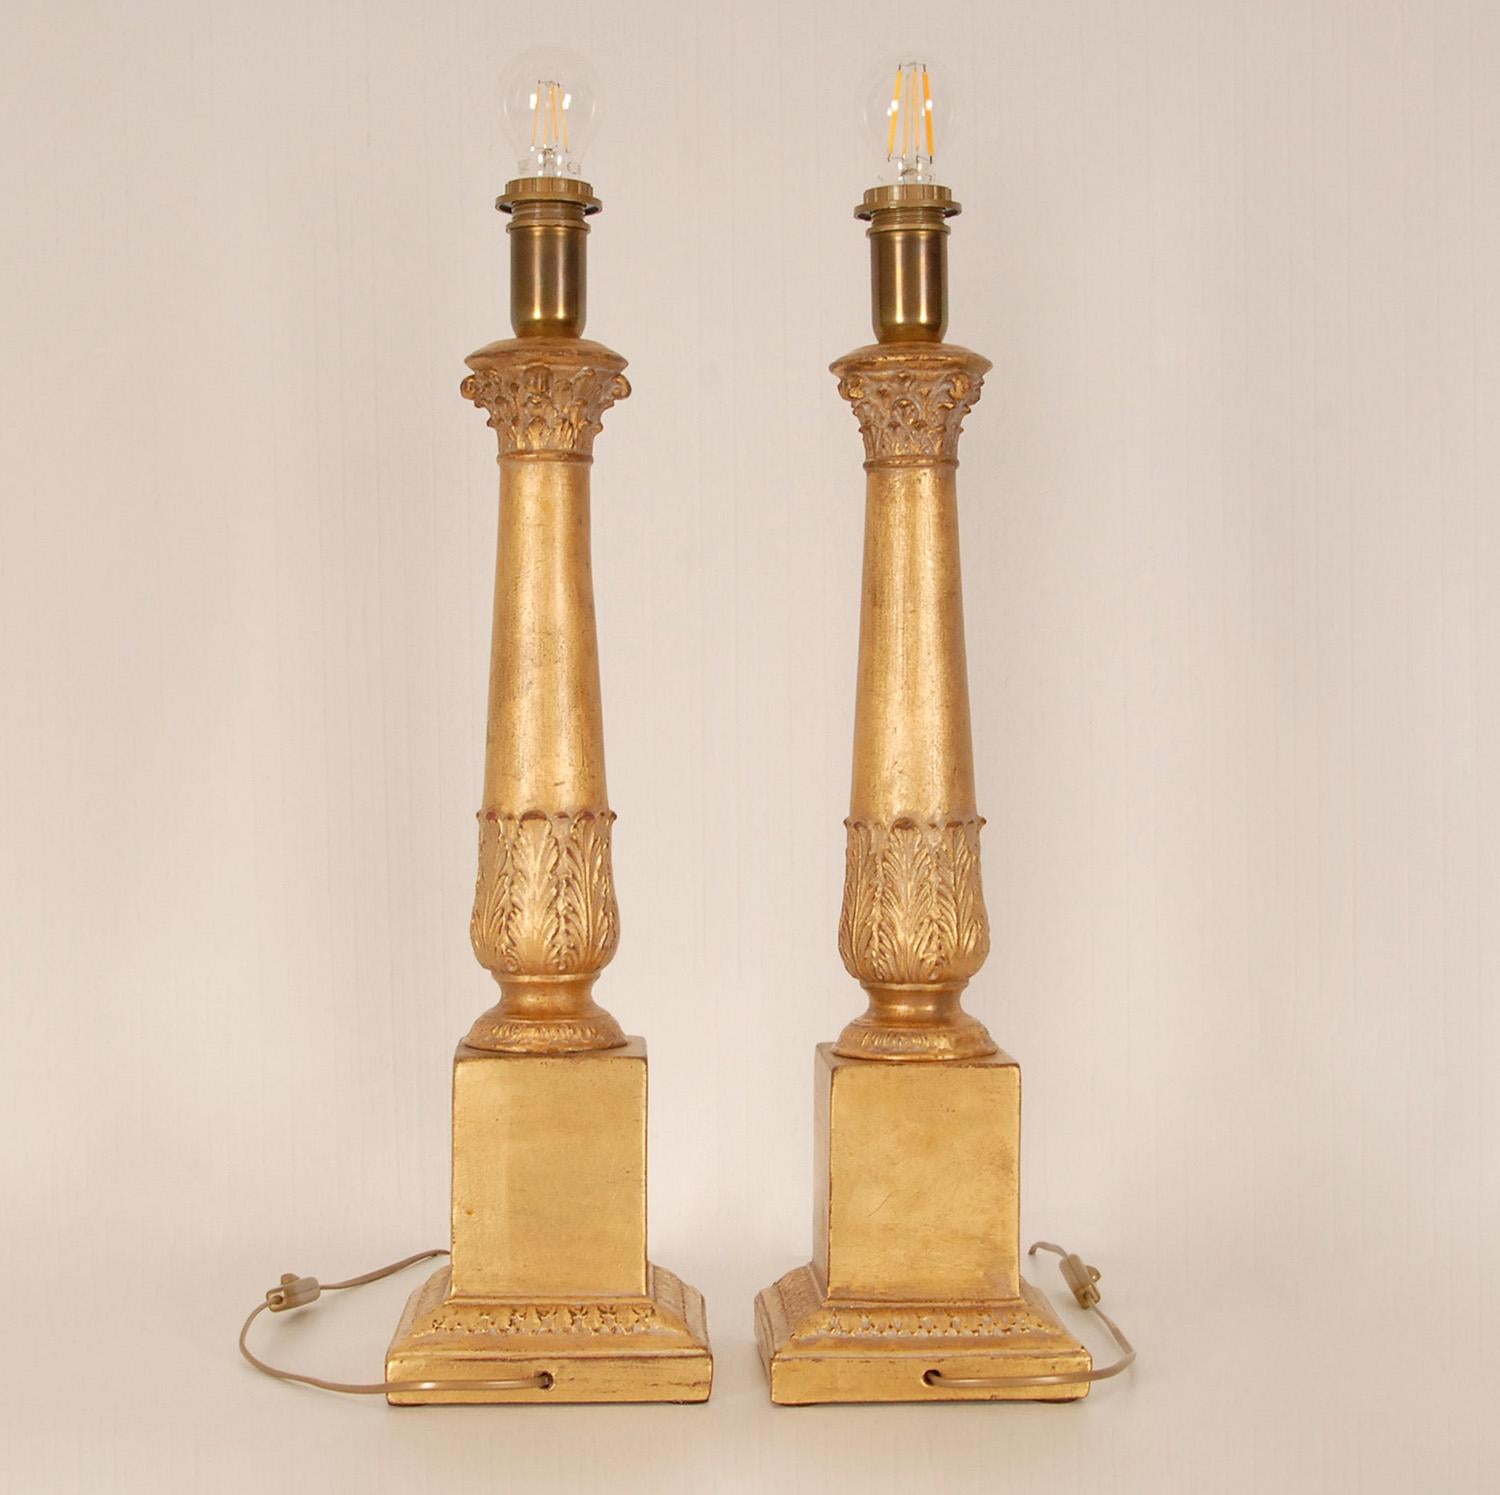 Vintage Italian Ceramic Lamps Gold Gilded Corinthian Column Table Lamps a Pair For Sale 3